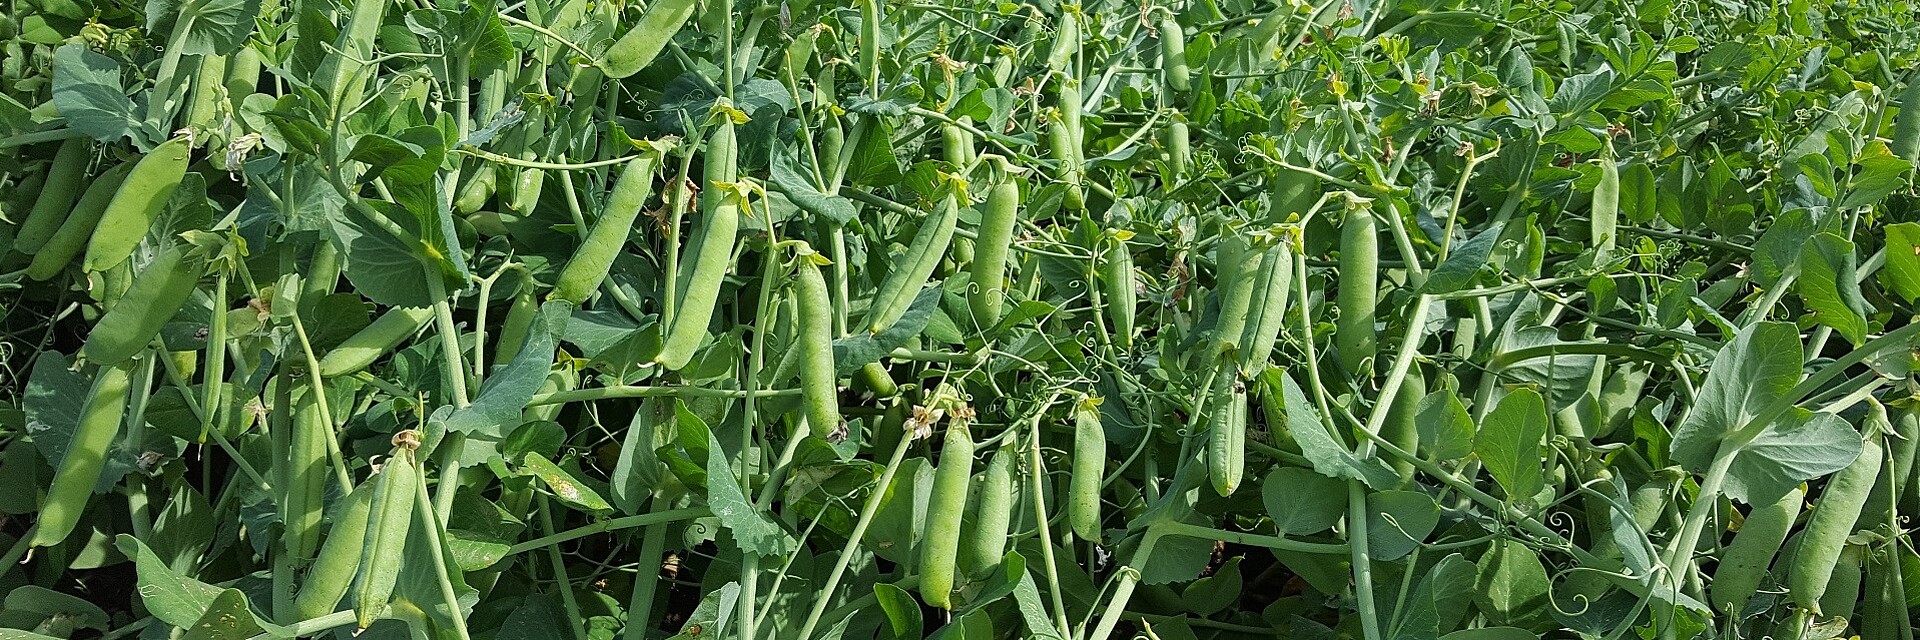 Field with ripe Vining peas from Strube